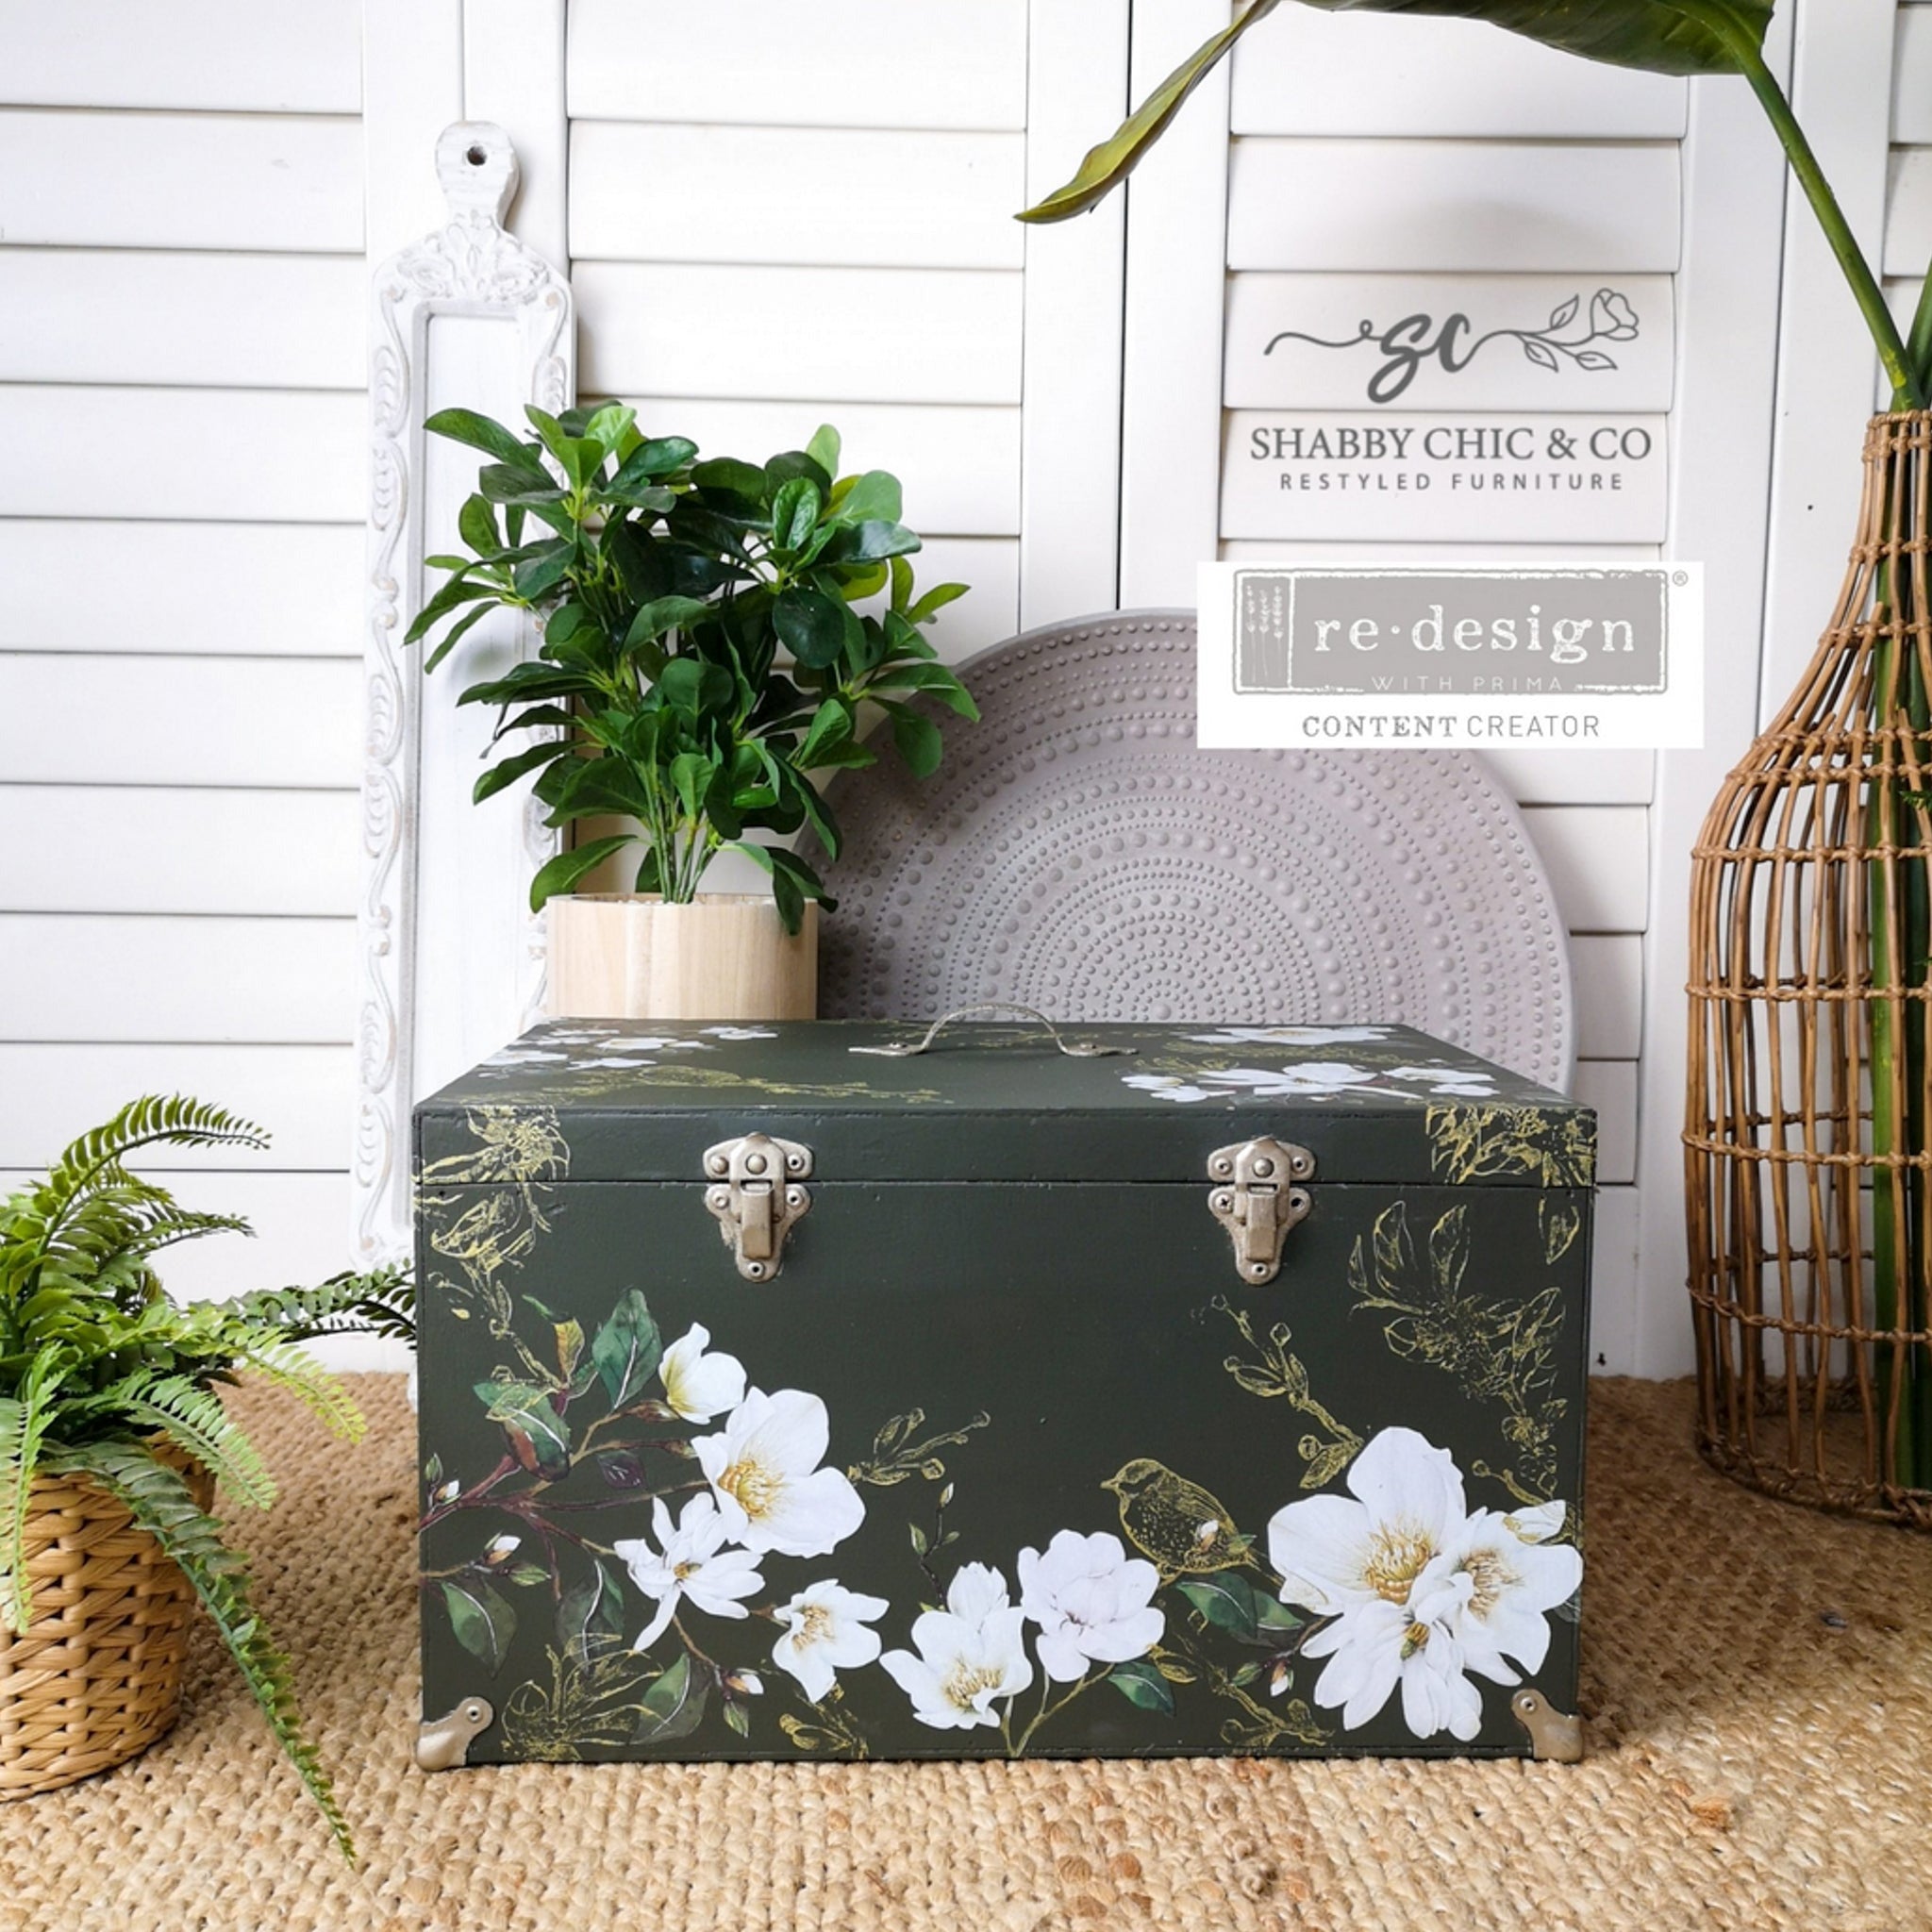 A vintage footlocker storage chest refurbished by Shabby Chic & Co. Restyled Furniture is painted hunter green and features ReDesign with Prima's White Magnolia small transfer on it.